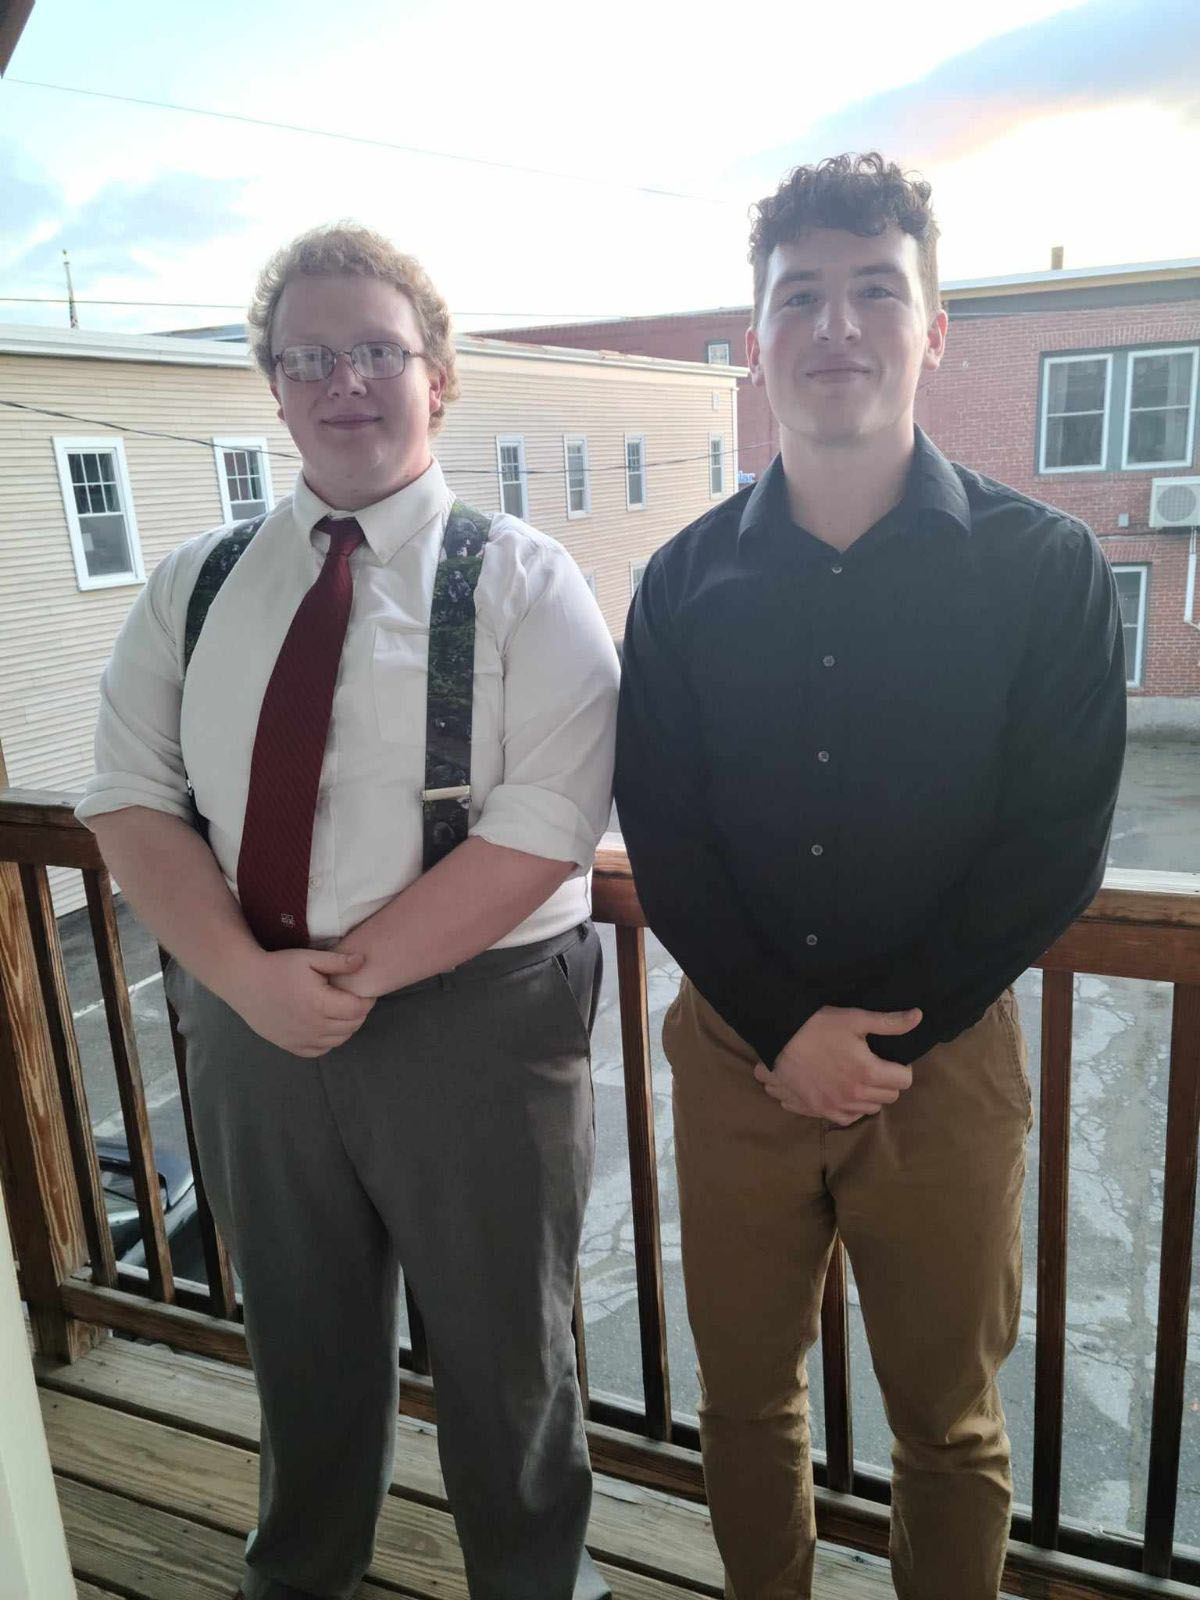 Mr. Mayo takes part in Sigma Tau Delta, the English Honor Society, with his dorm roommate. The trusty suspenders finish his slick style. Photo courtesy of Mr. Mayo. 